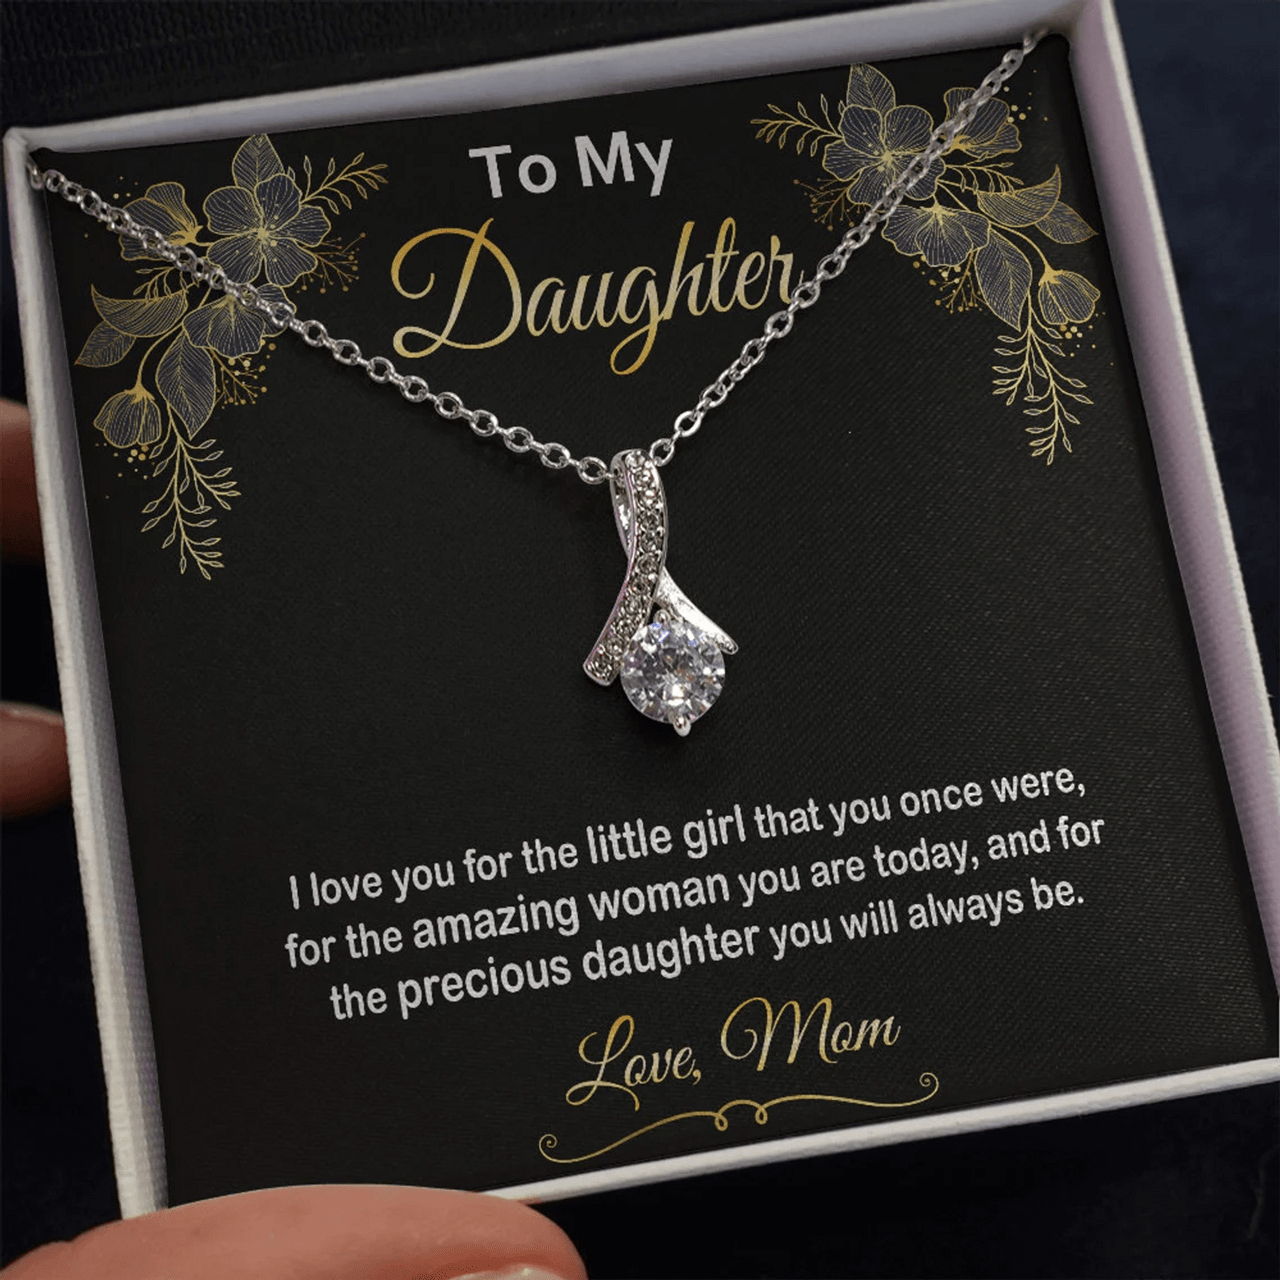 To My Daughter Alluring Necklace From Mom - I Love You For The Little Girl That You Once Were For The Amazing Woman You Are Today